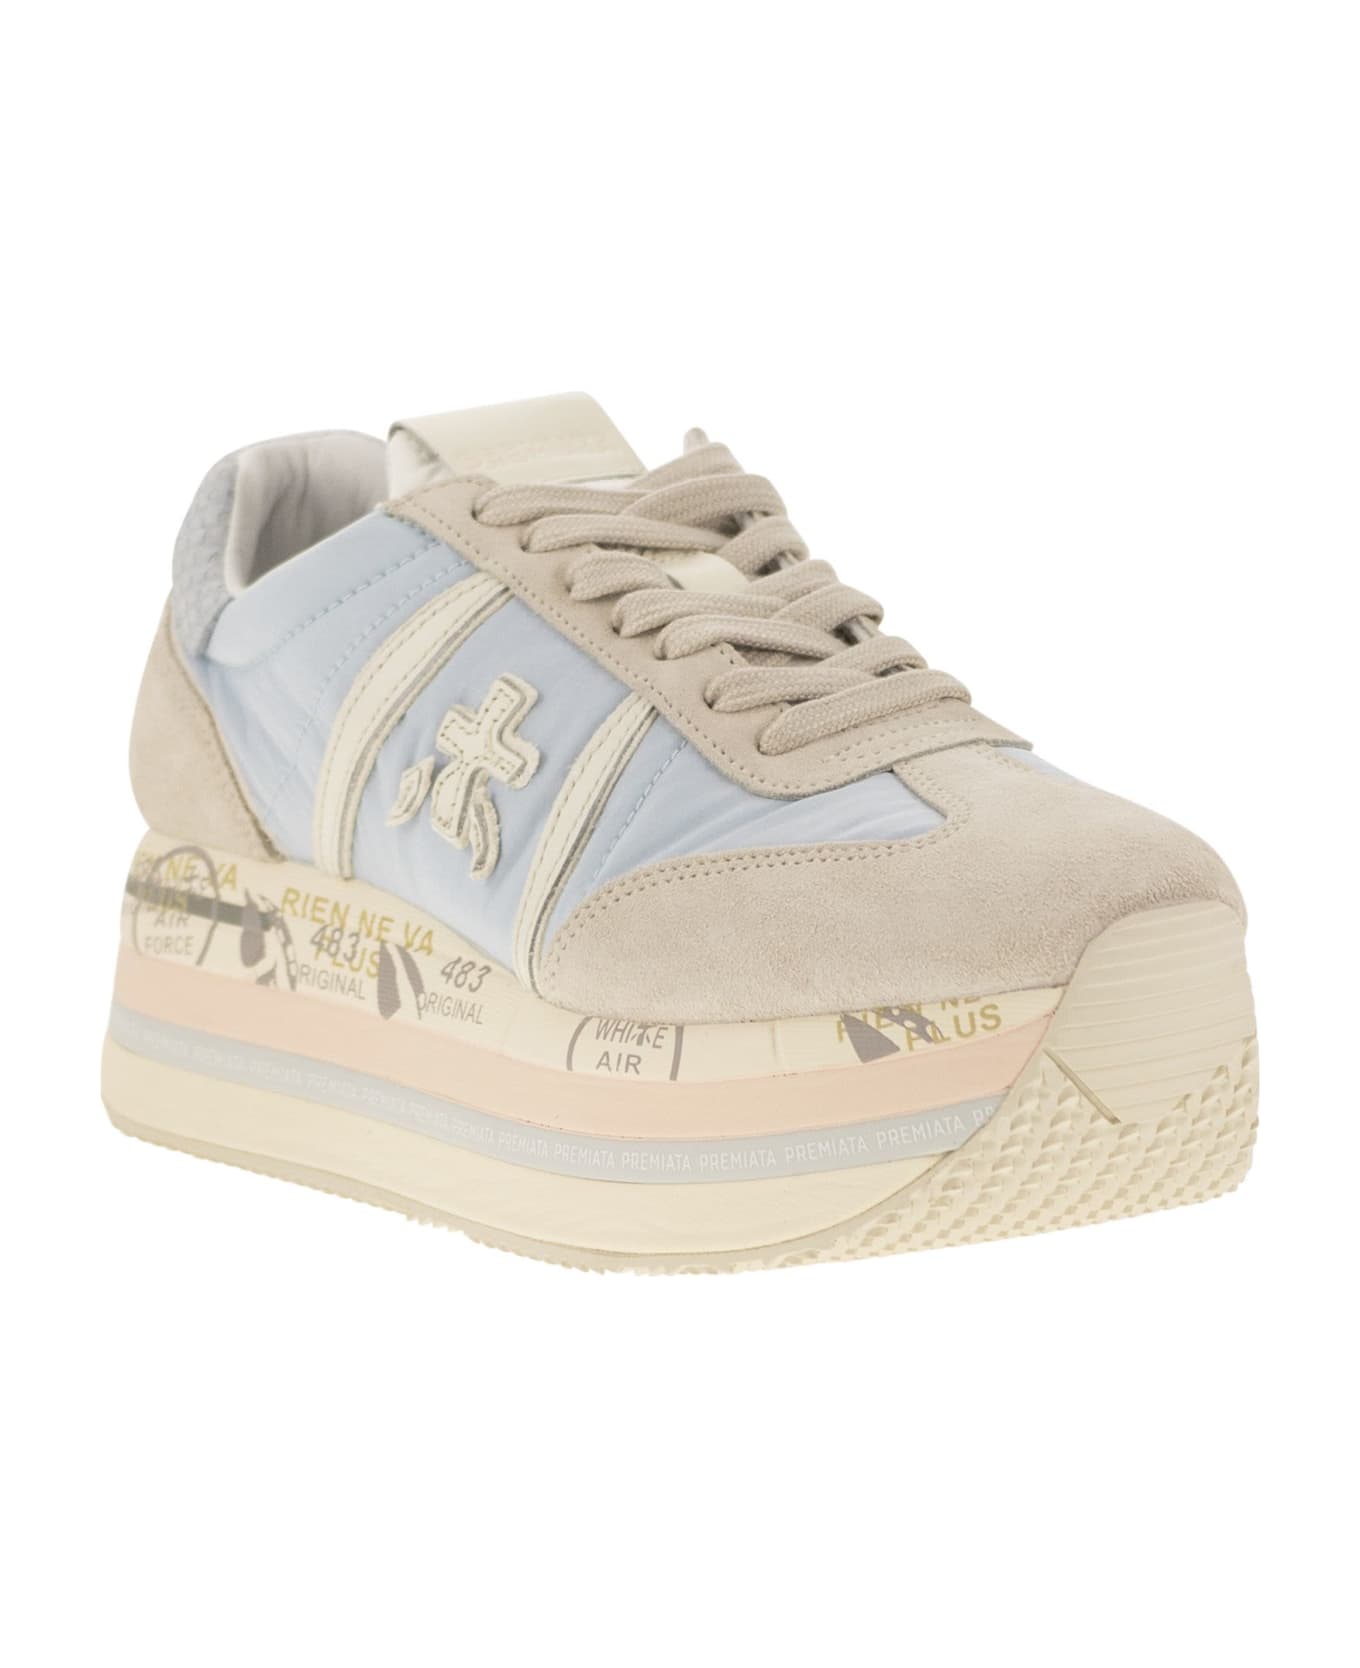 Premiata Beth Sneakers In Beige Suede And Fabric - White/light Blue